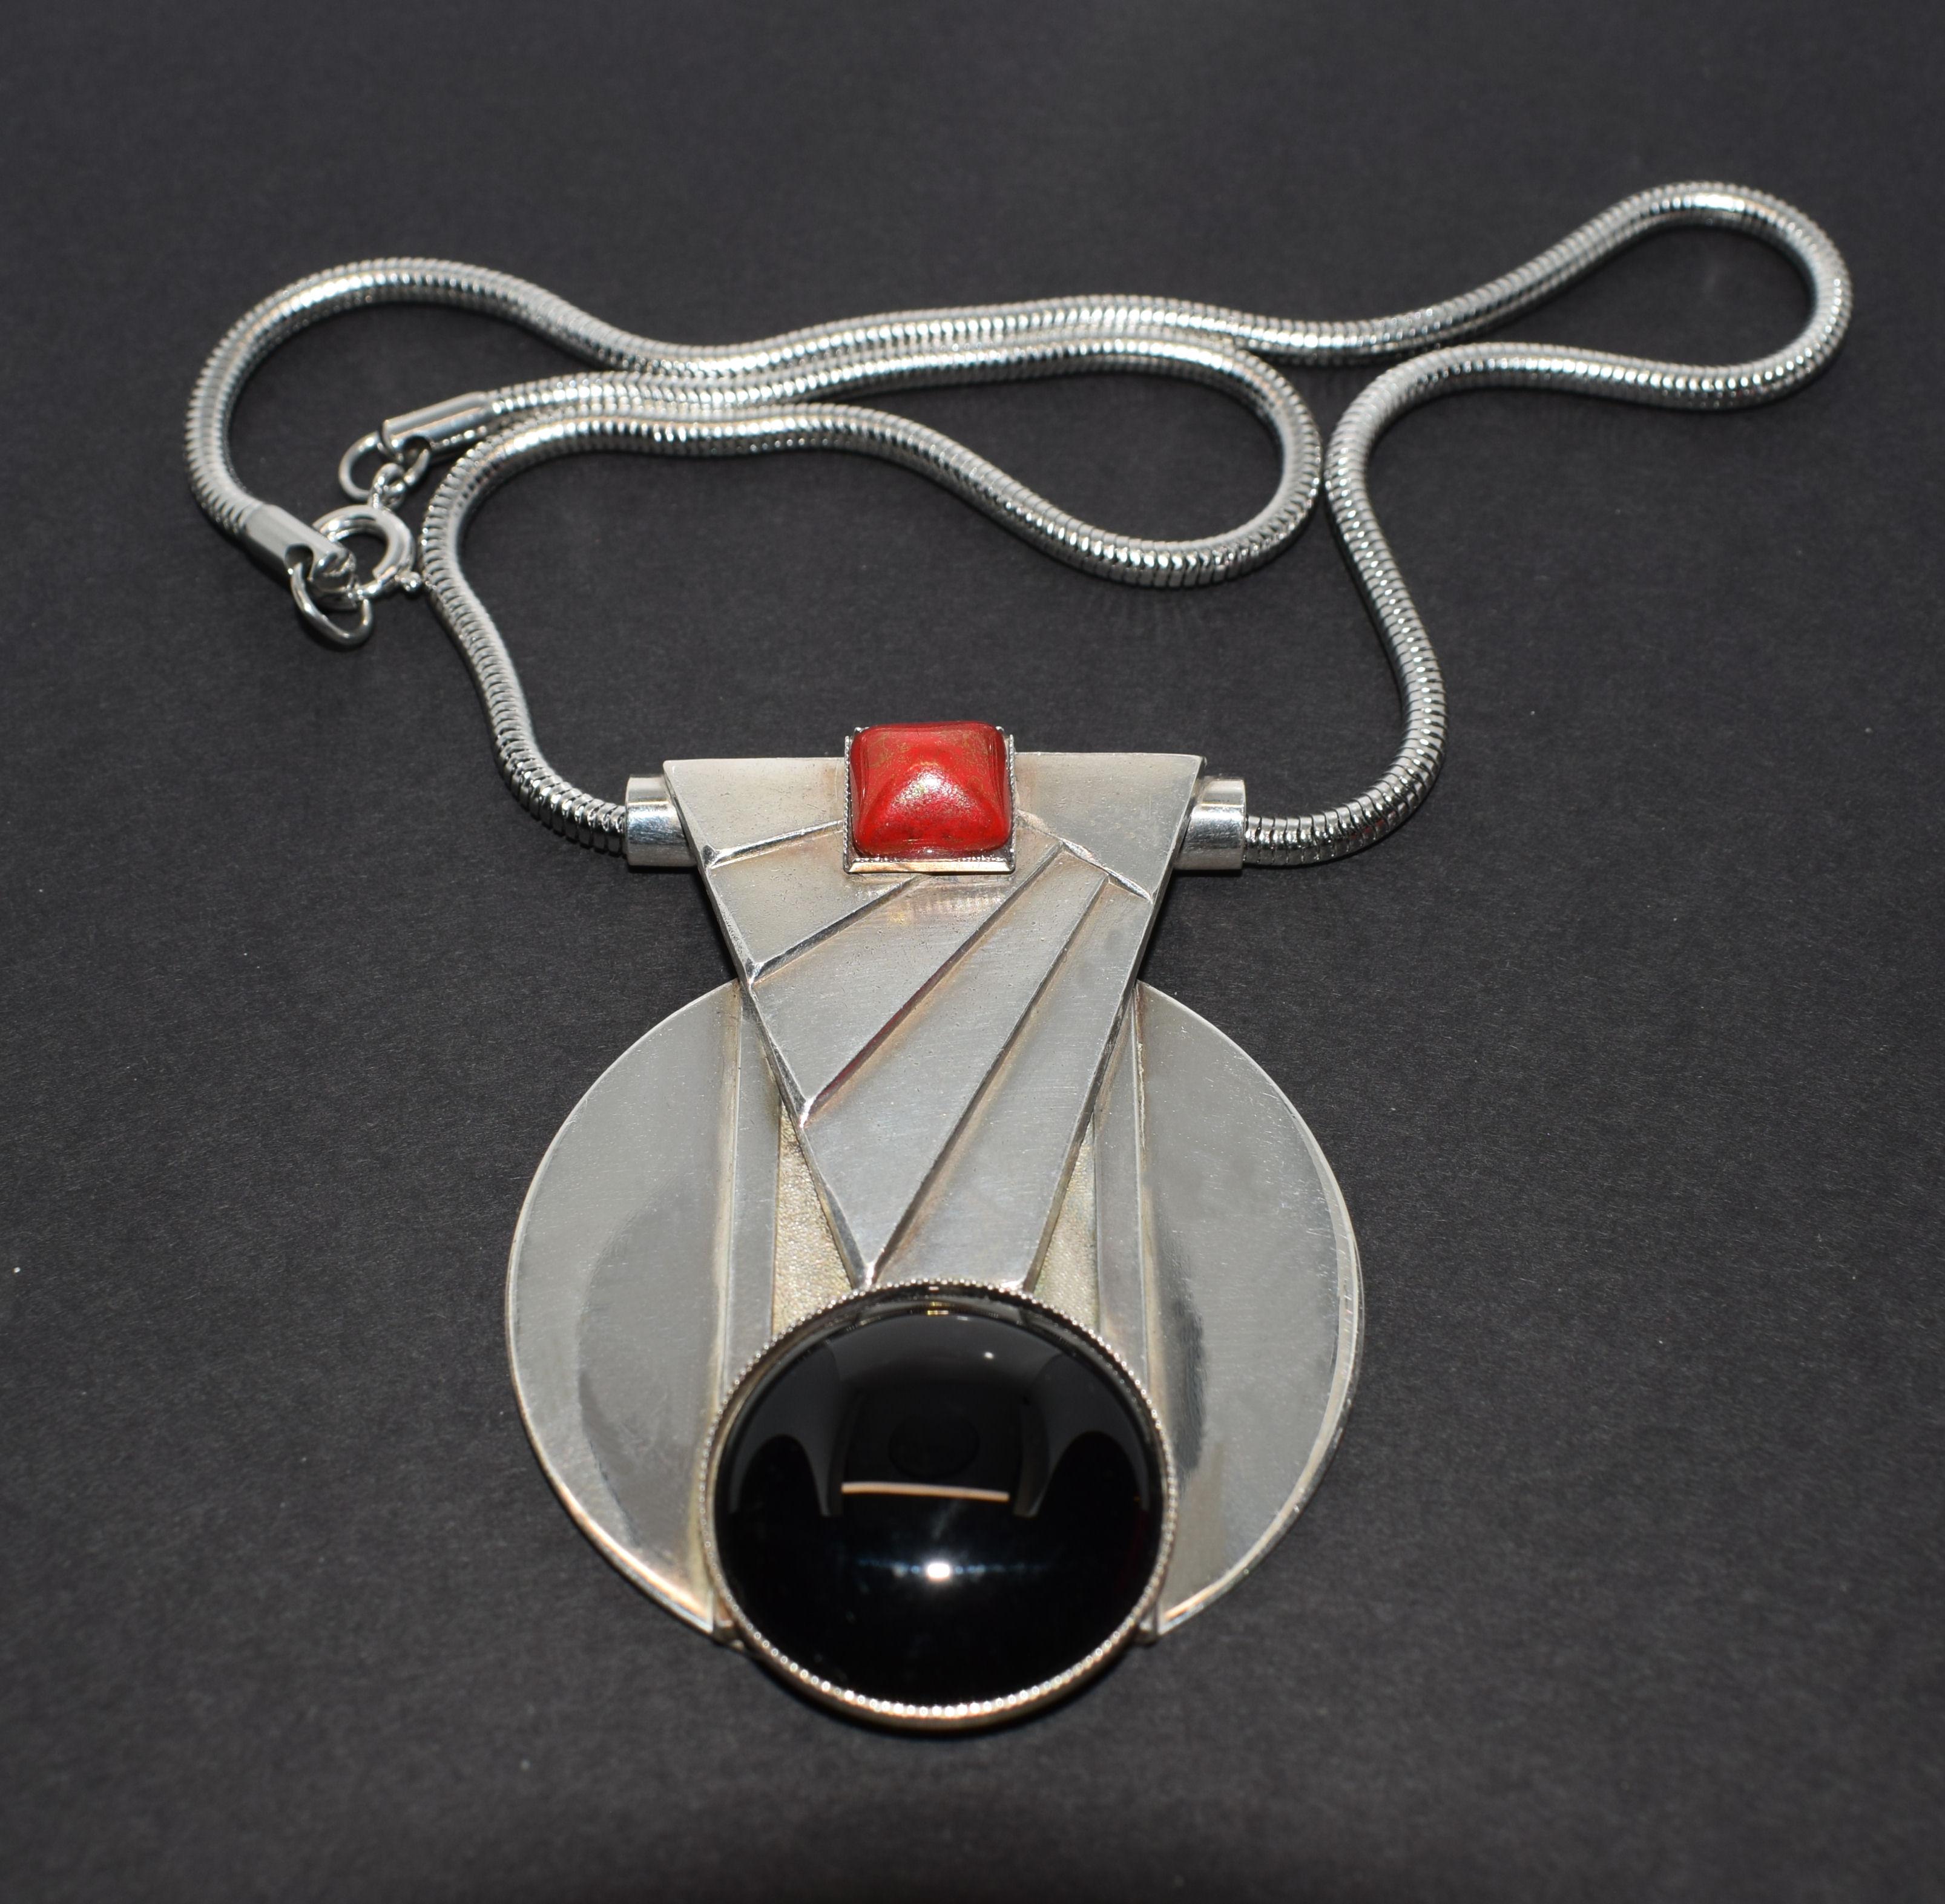 Classic and very high quality ladies Art Deco Modernist necklace, totally authentic and to the period, dating to the 1930's. Features a cherry red glass centre piece which is mounted on a nickle plated back plate with a large black glass stone to